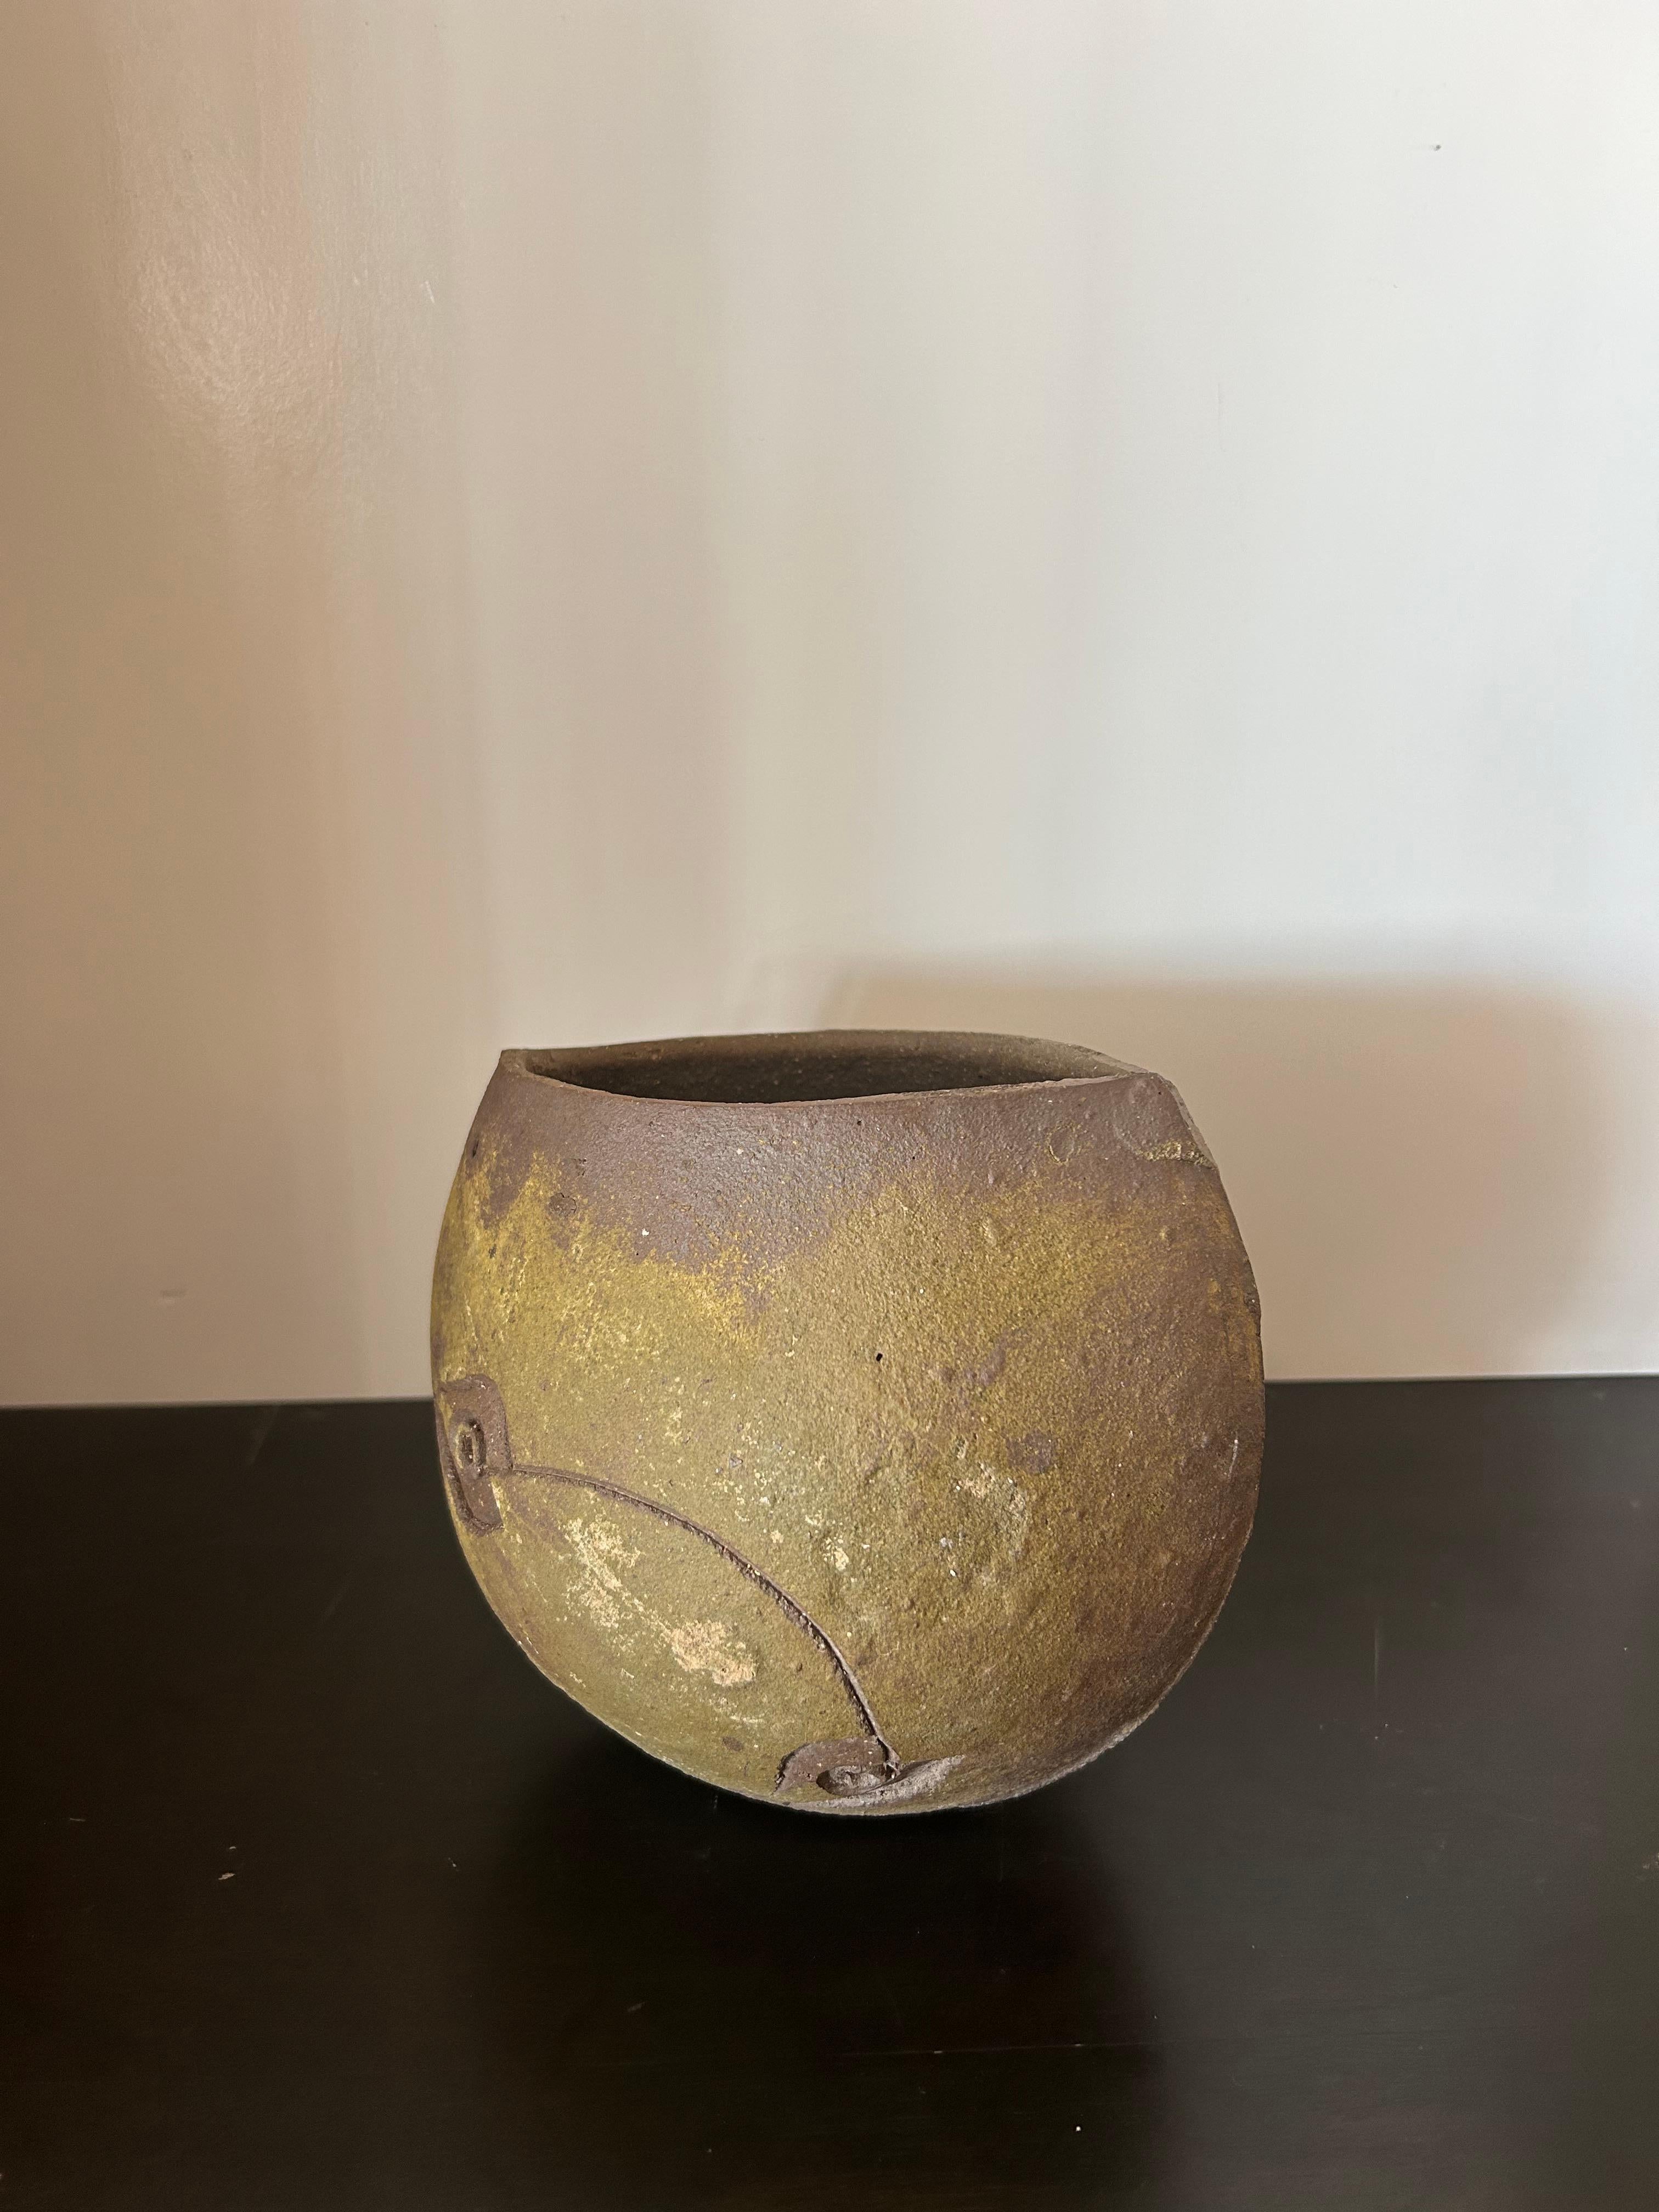 Earthenware pot by mid-century architect Paolo Soleri with minimal decorative fish motif. Can be displayed right side up or upside down..